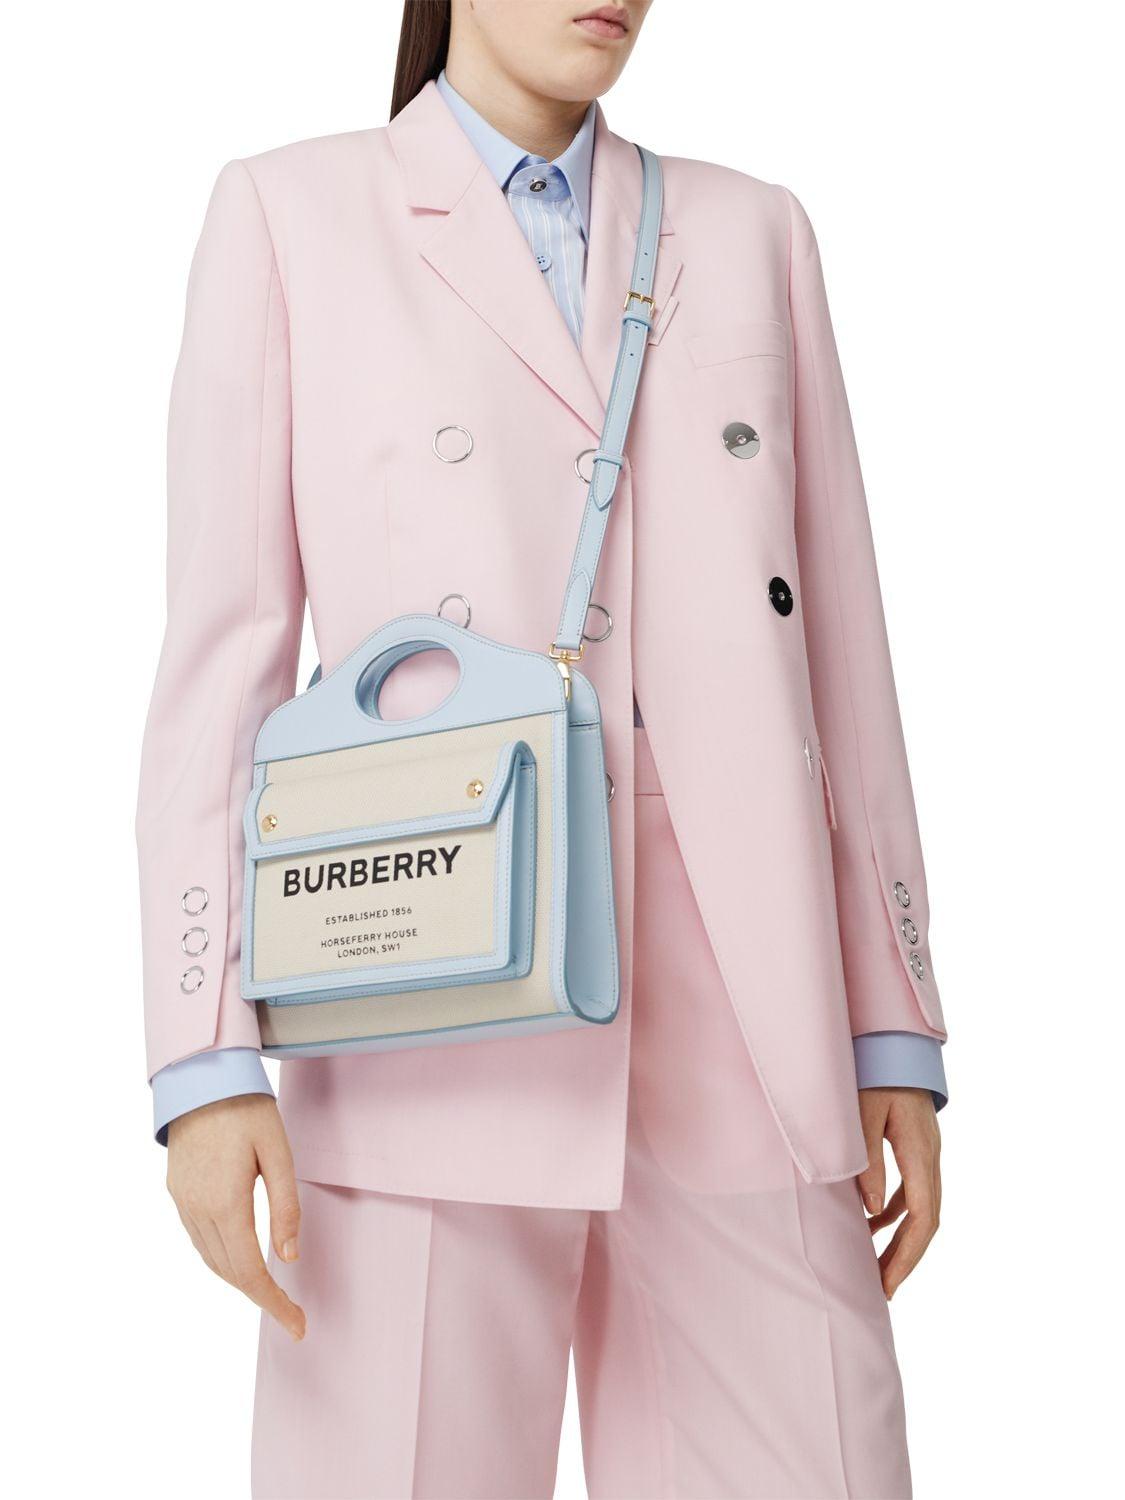 Burberry Pocket Logo Canvas & Leather Tote in Blue (Blue) - Lyst